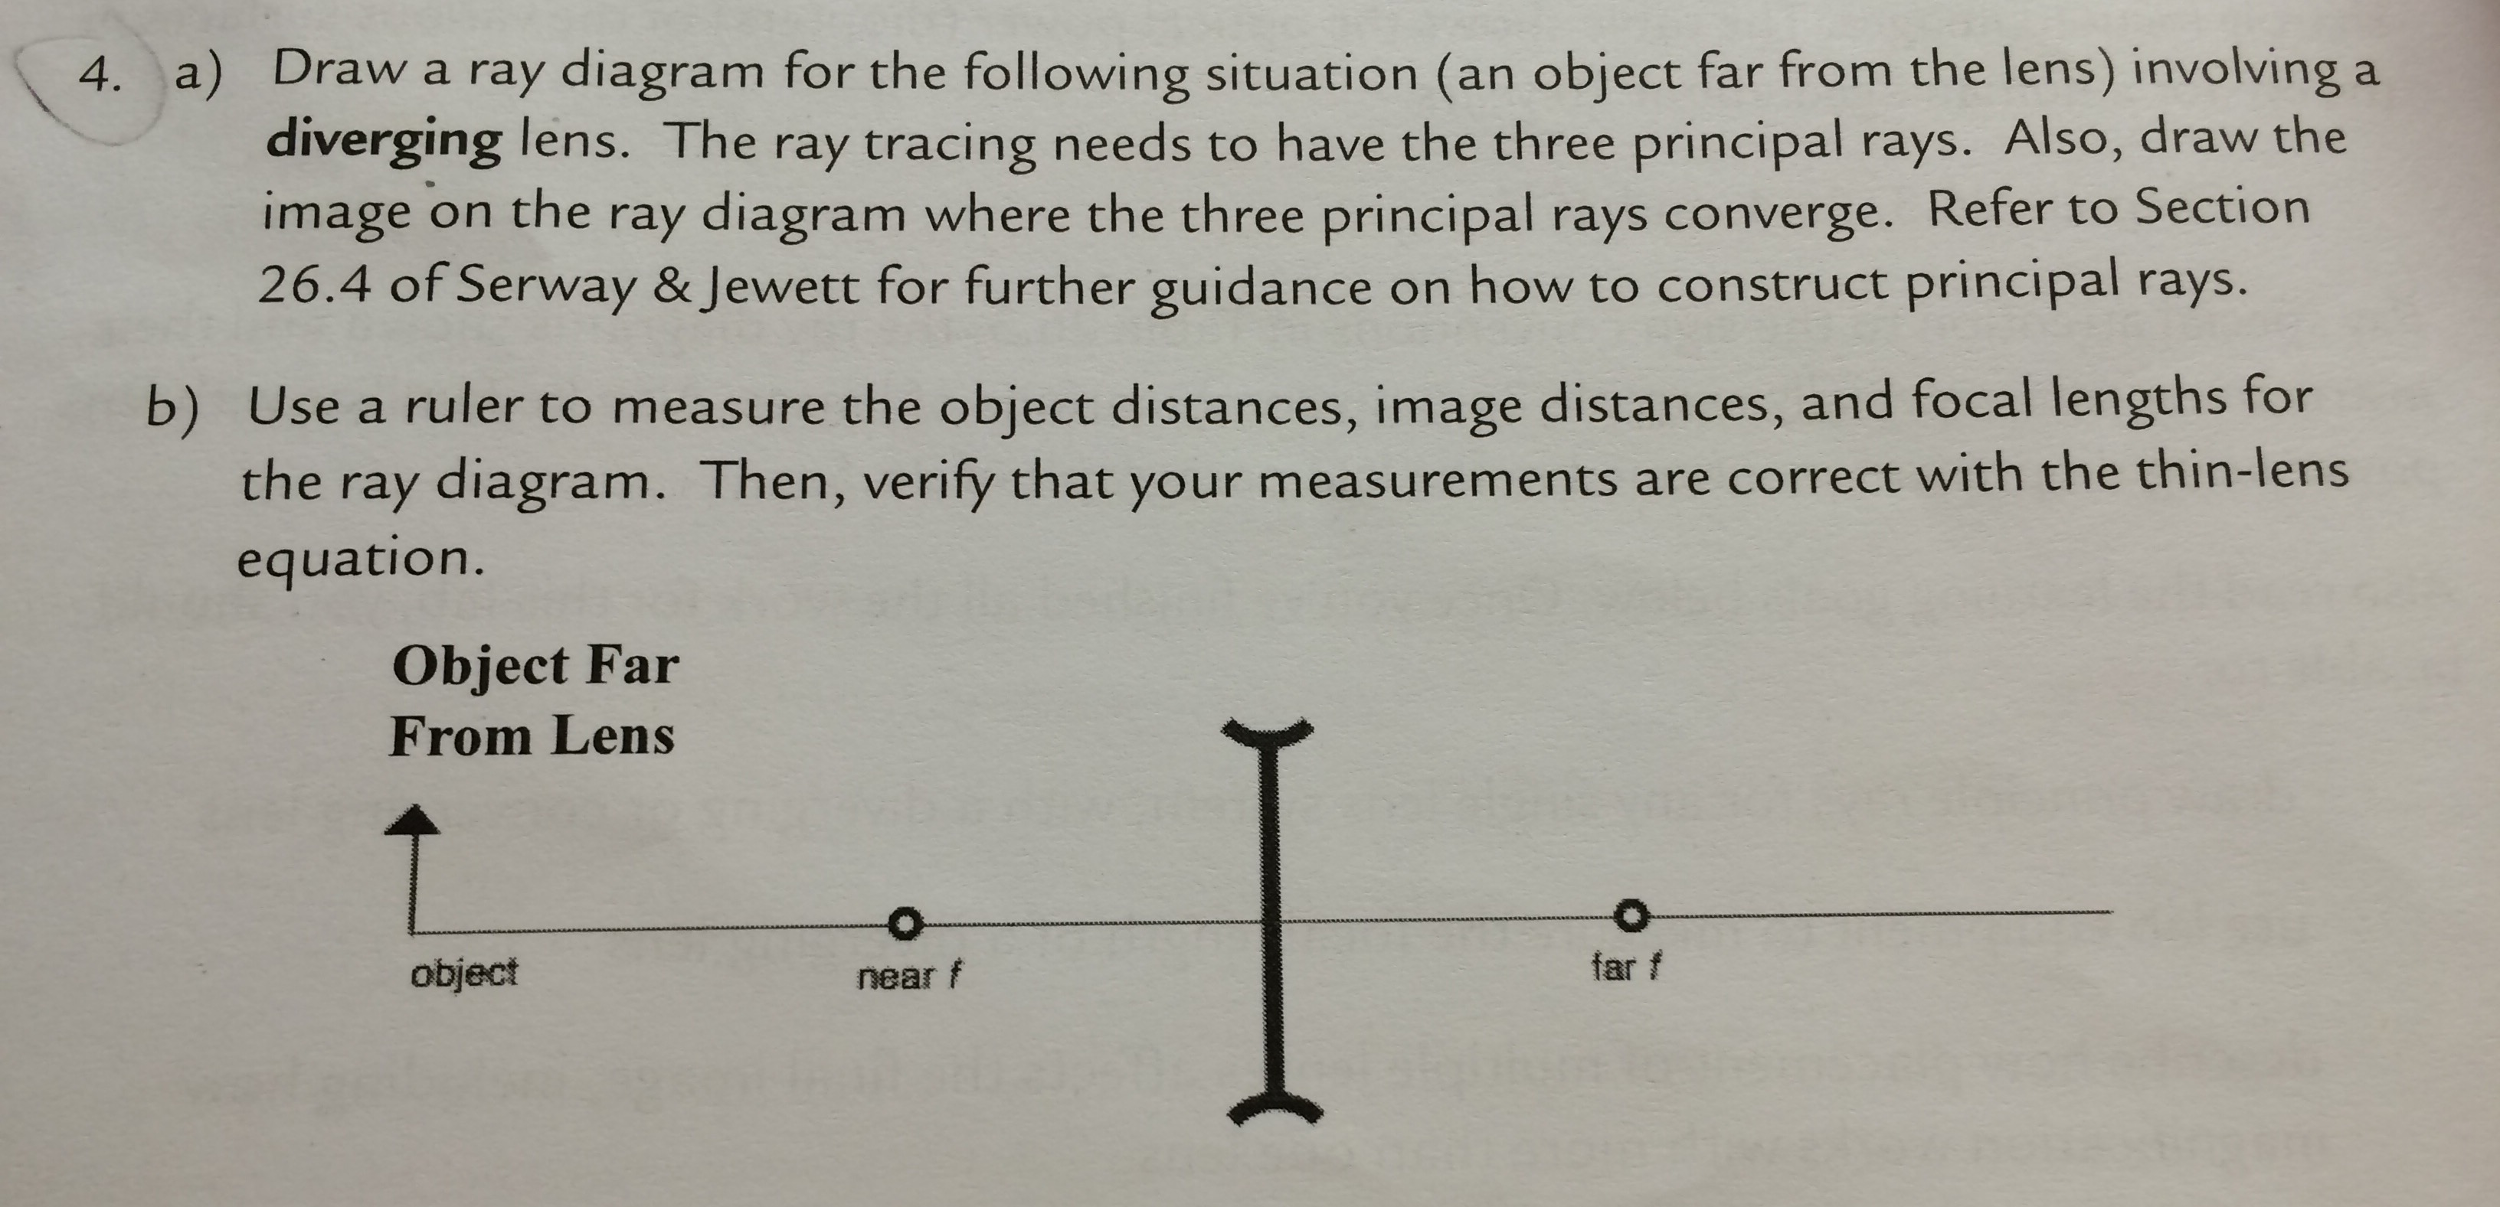 4. a) Draw a ray diagram for the following situation (an object far from the lens) involving a diverging lens. The ray tracing needs to have the three principal rays. Also, draw the image on the ray diagram where the three principal rays converge. Refer to Section 26.4 of Serway & Jewett for further guidance on how to construct principal rays. b) Use a ruler to measure the object distances, image distances, and focal lengths for the ray diagram. Then, verify that your measurements are correct with the thin-lens equation. Object Far From Lens object near f far f